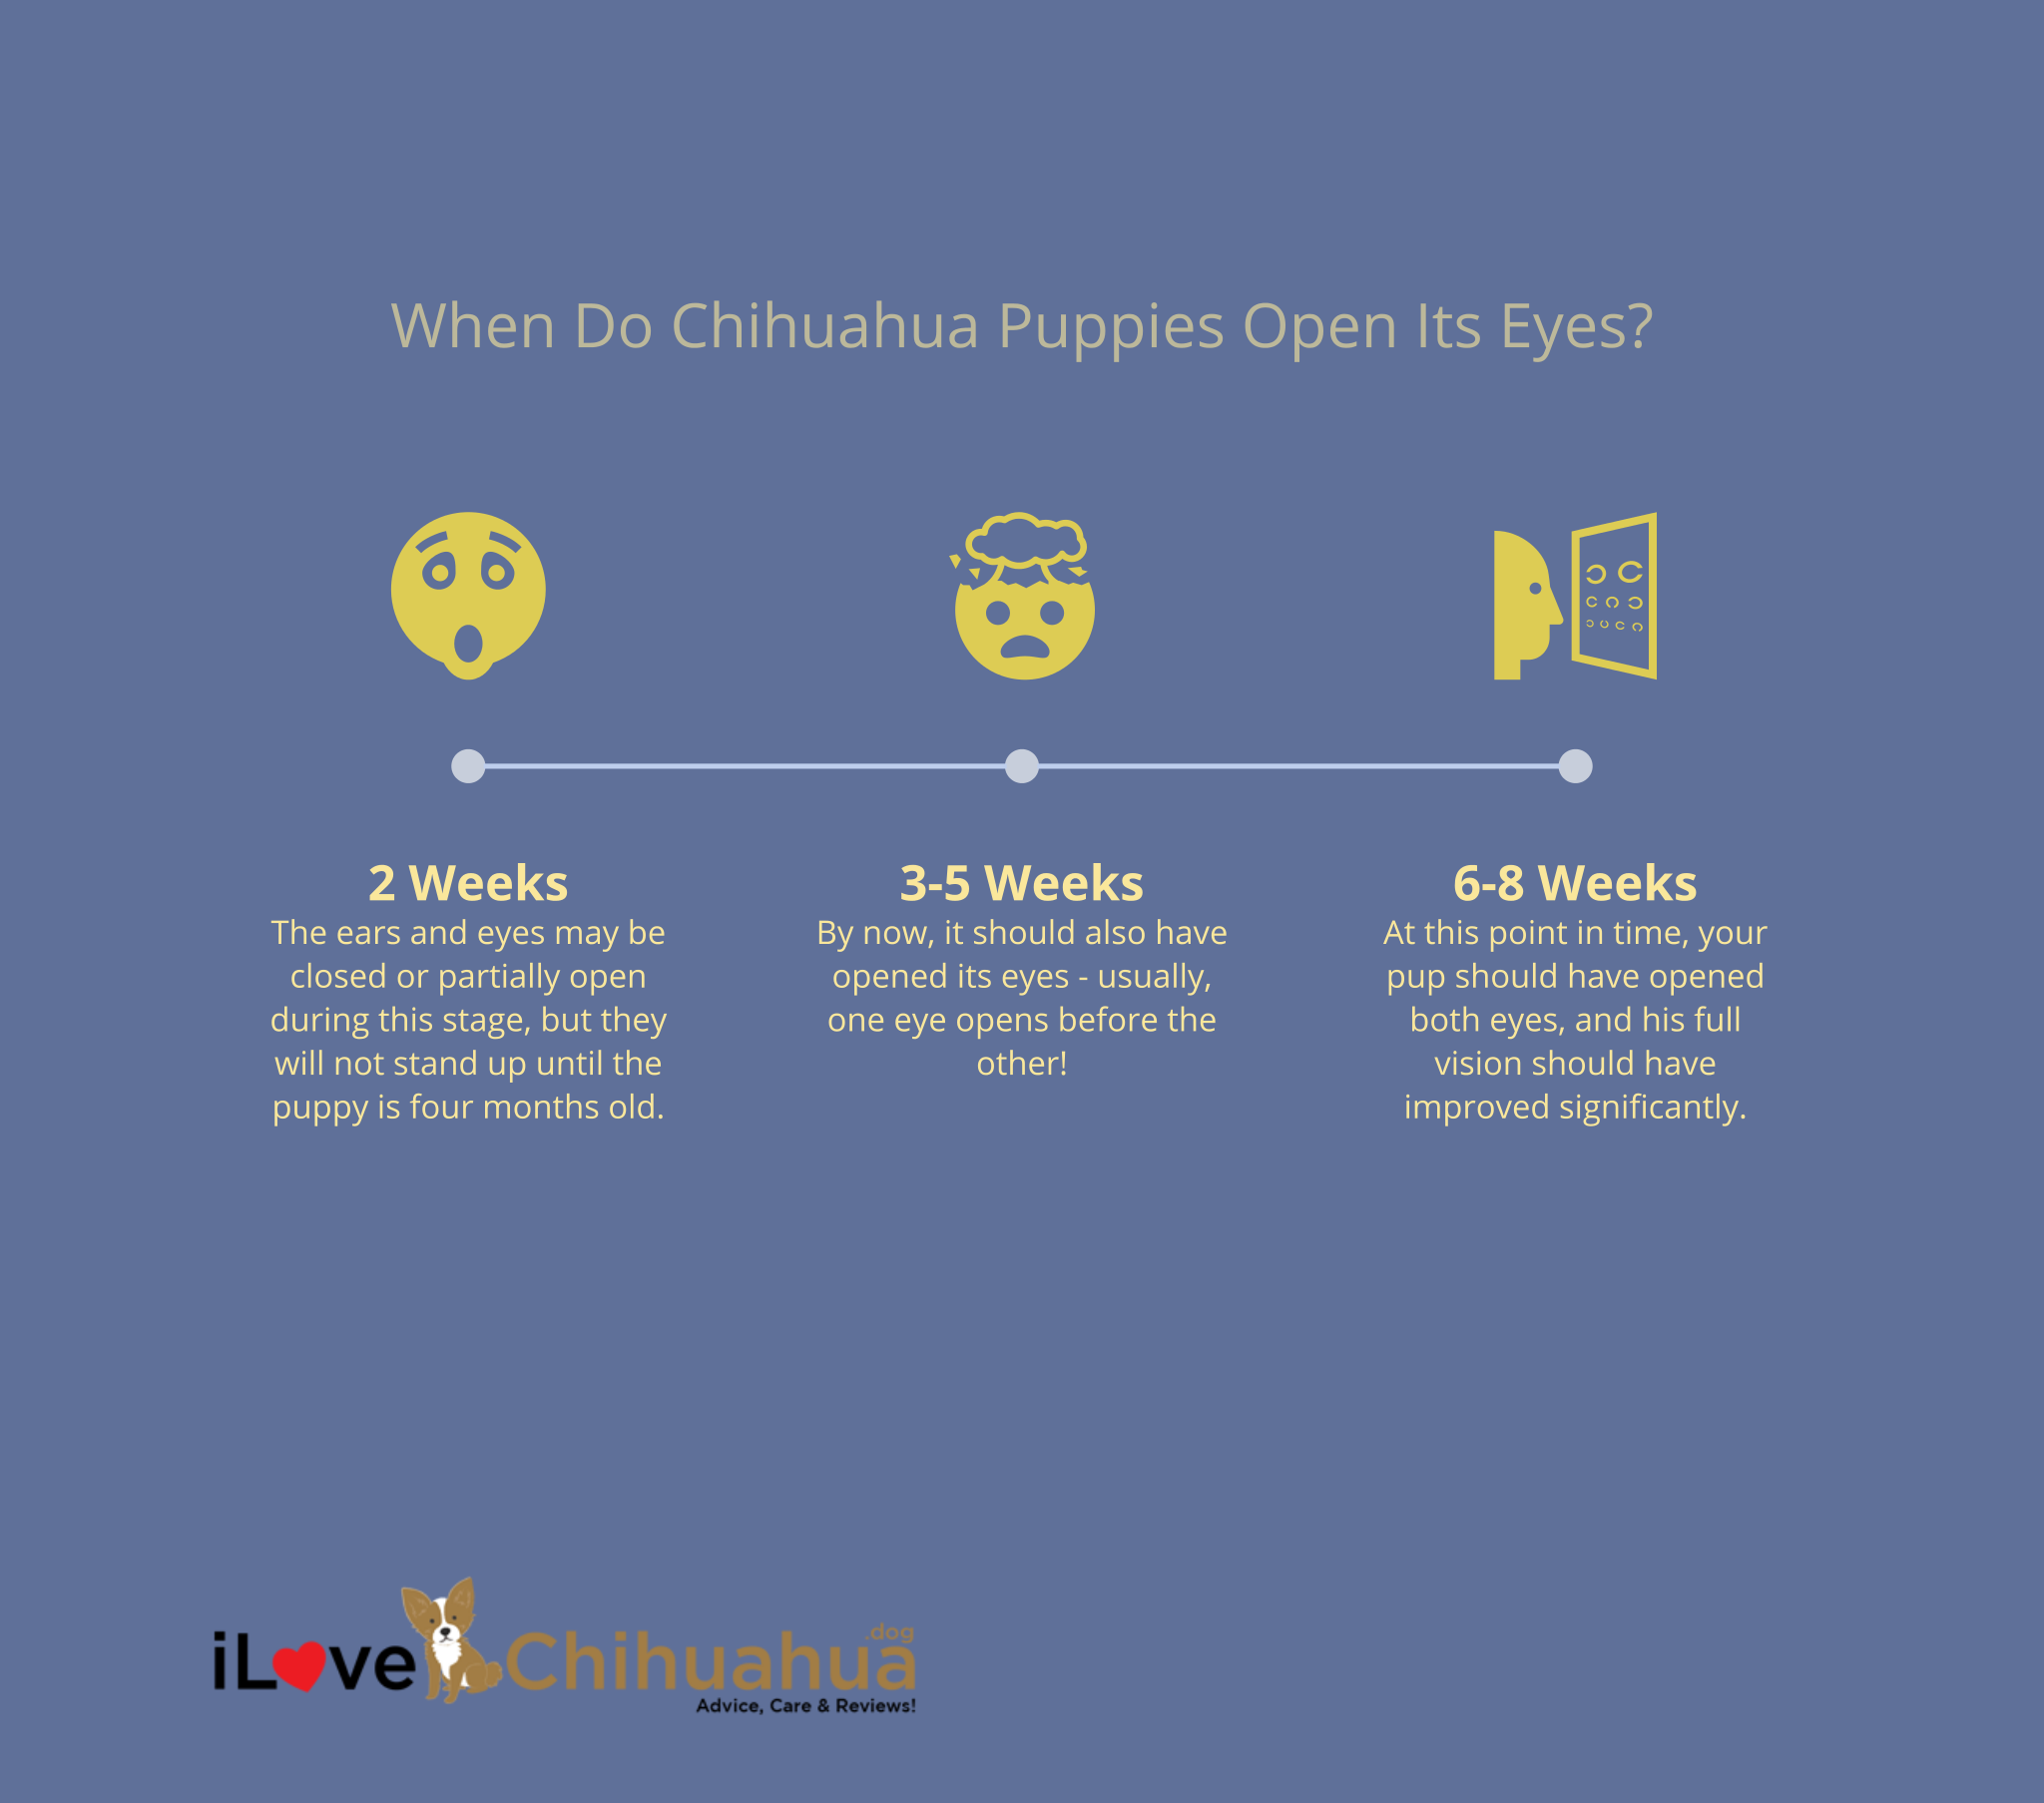 when do chihuahua puppies open their eyes